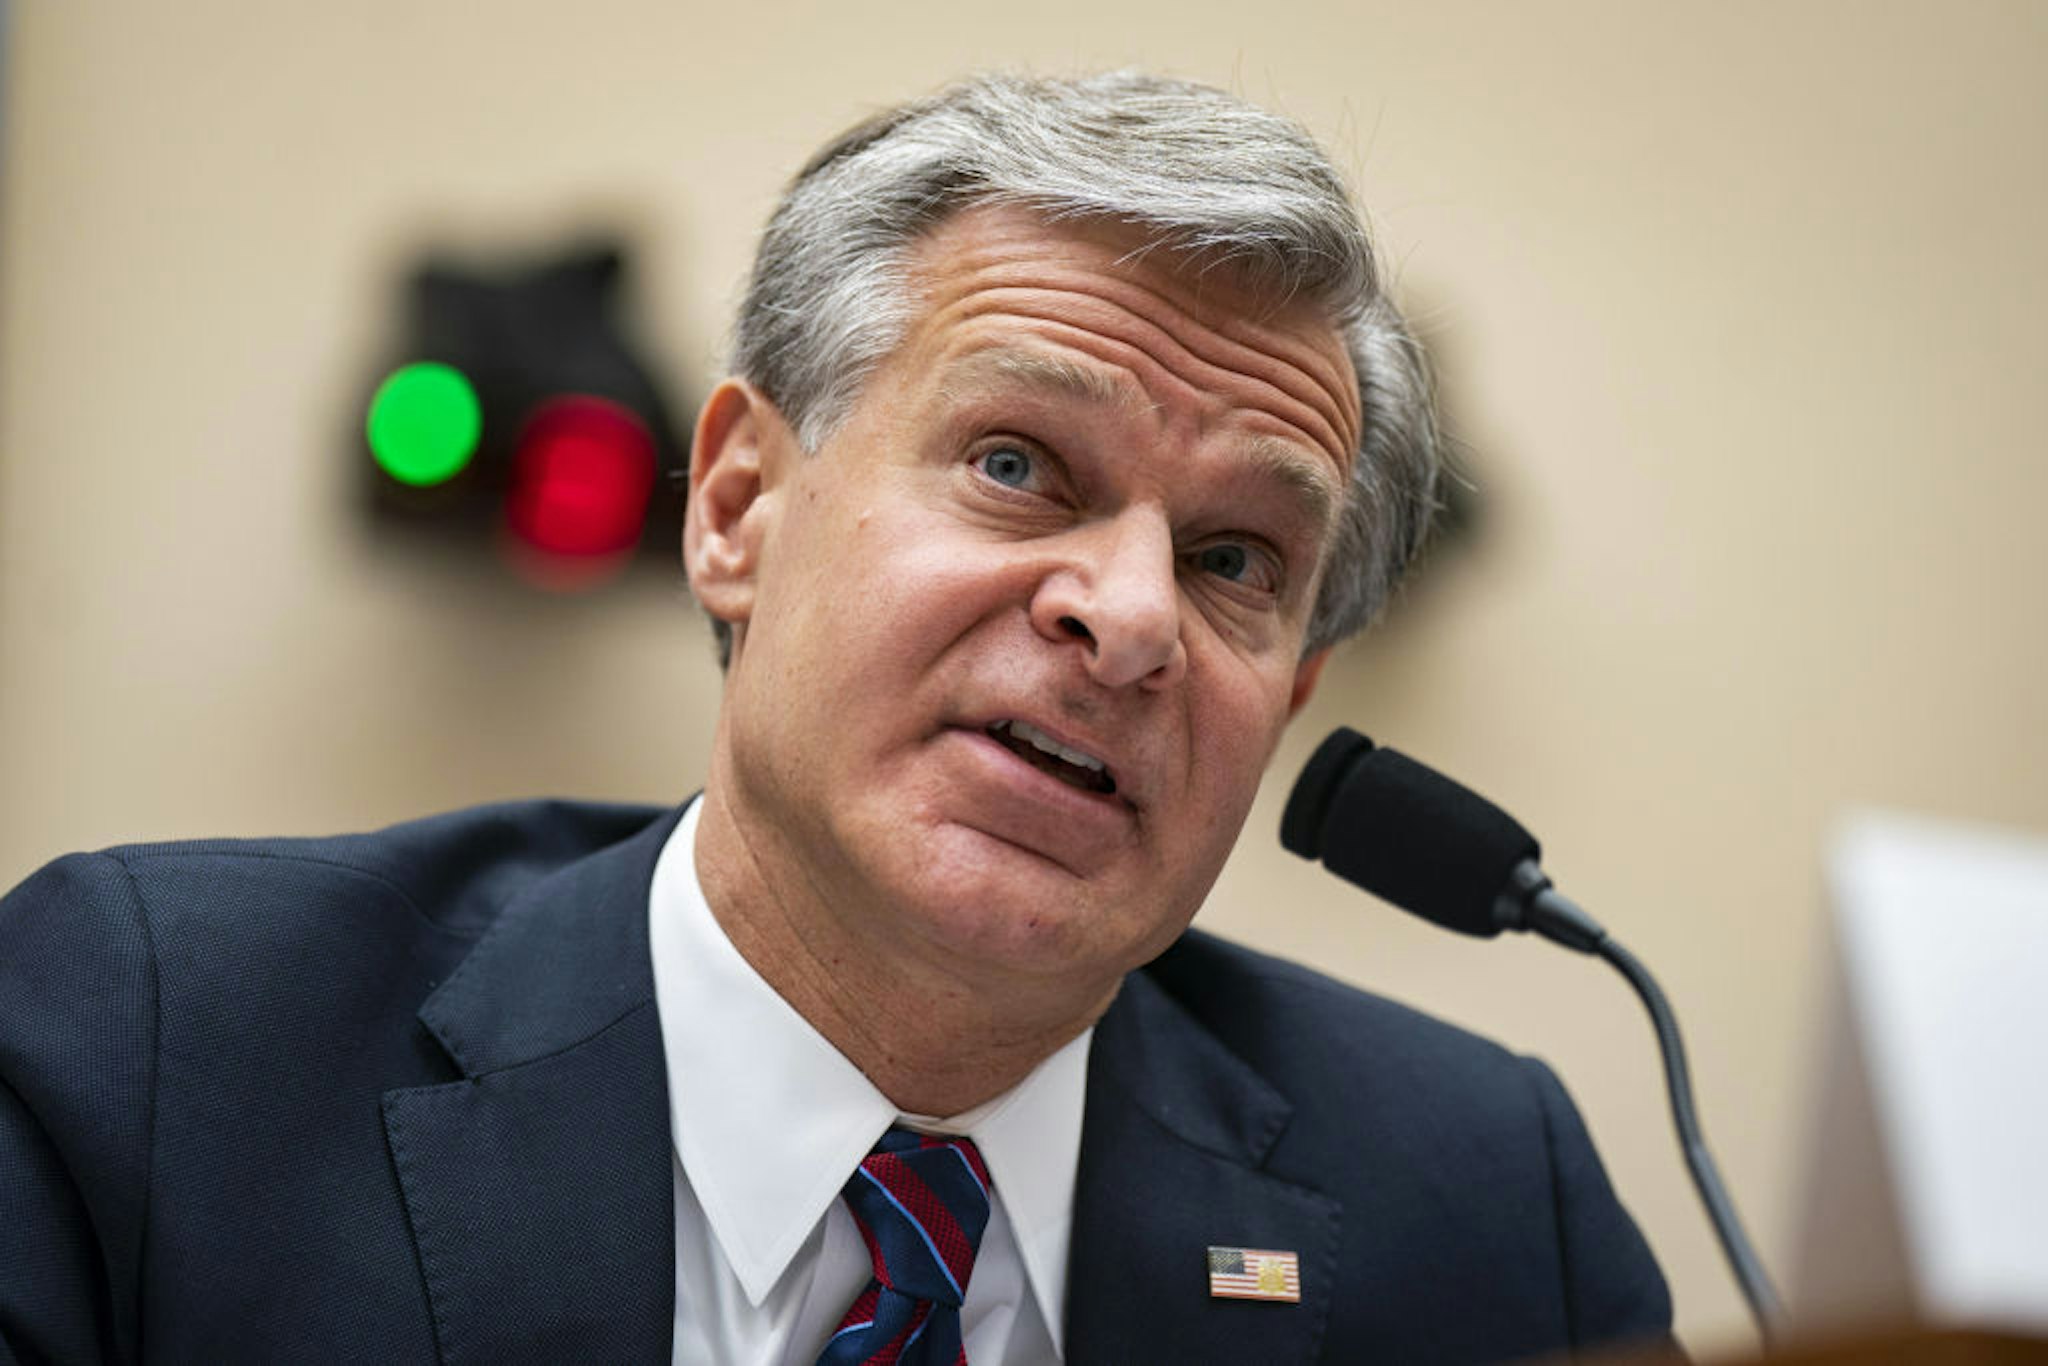 Christopher Wray, director of the Federal Bureau of Investigation (FBI), speaks during a House Judiciary Committee hearing in Washington, DC, US, on Wednesday, July 12, 2023. Wray is testifying before the committee amid calls by some hardline conservatives for his ouster.